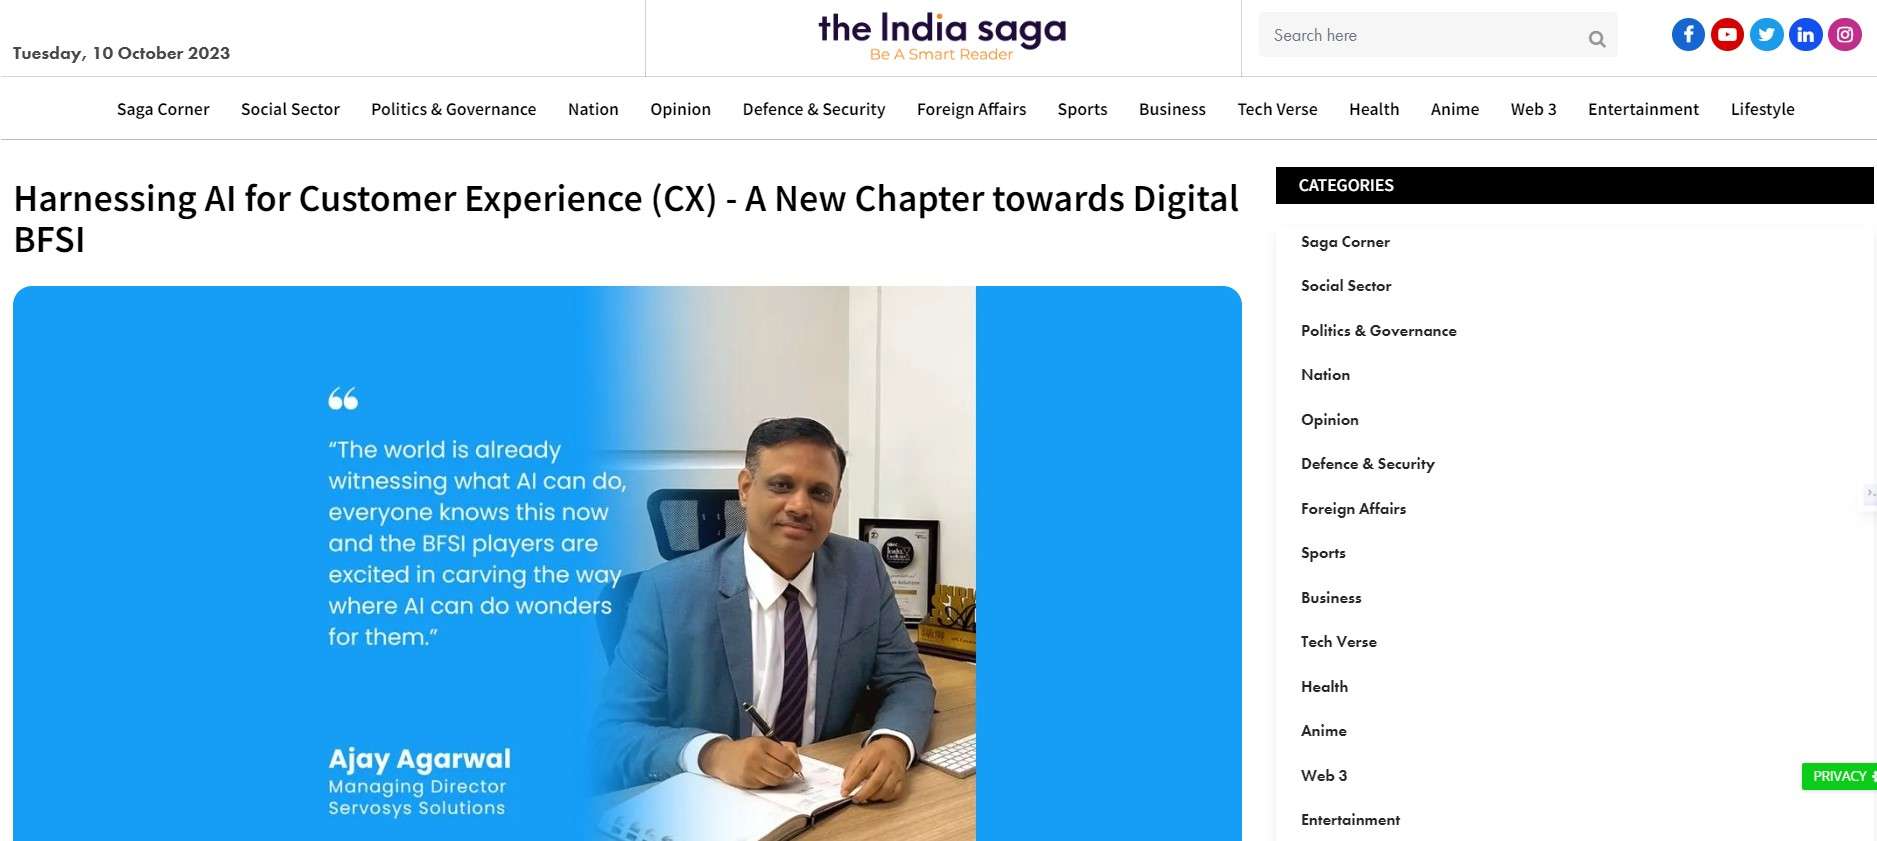 Harnessing AI for Customer Experience (CX) – A New Chapter towards Digital BFSI